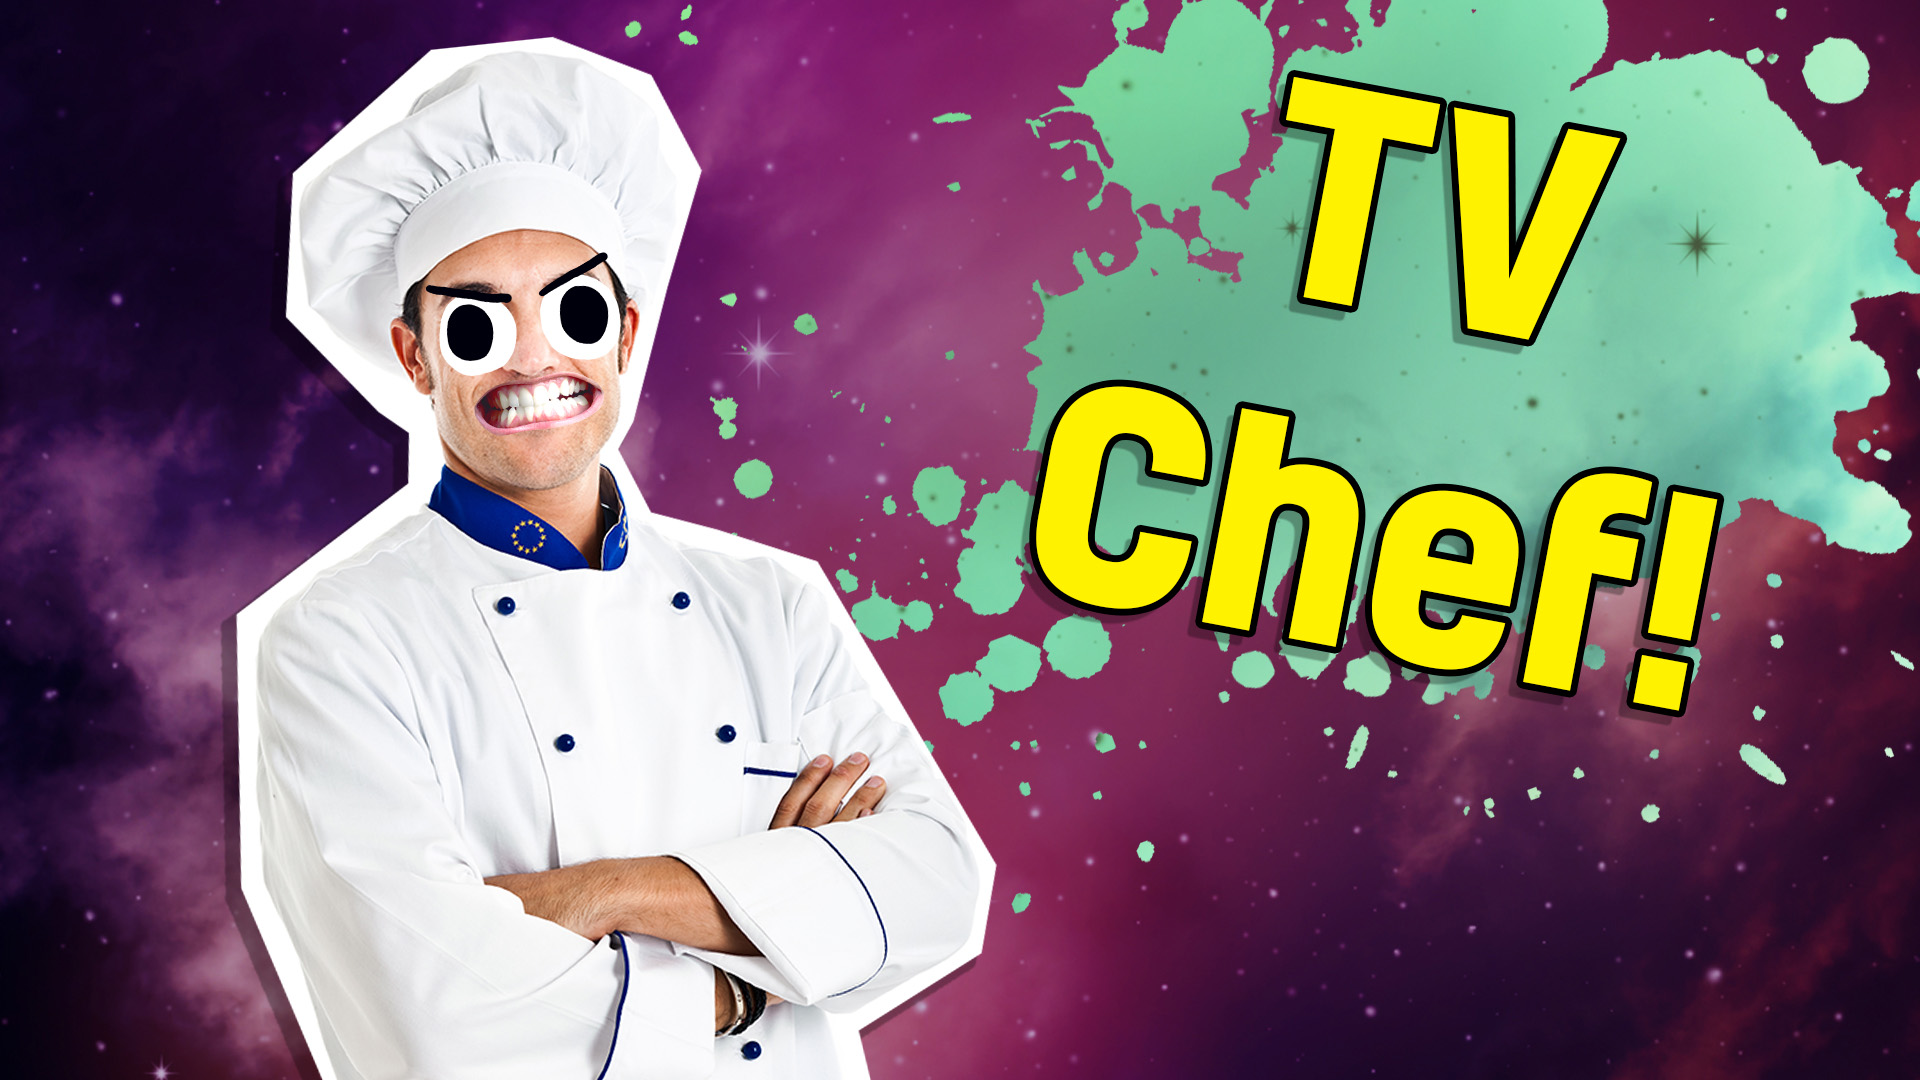 You should be a TV chef!